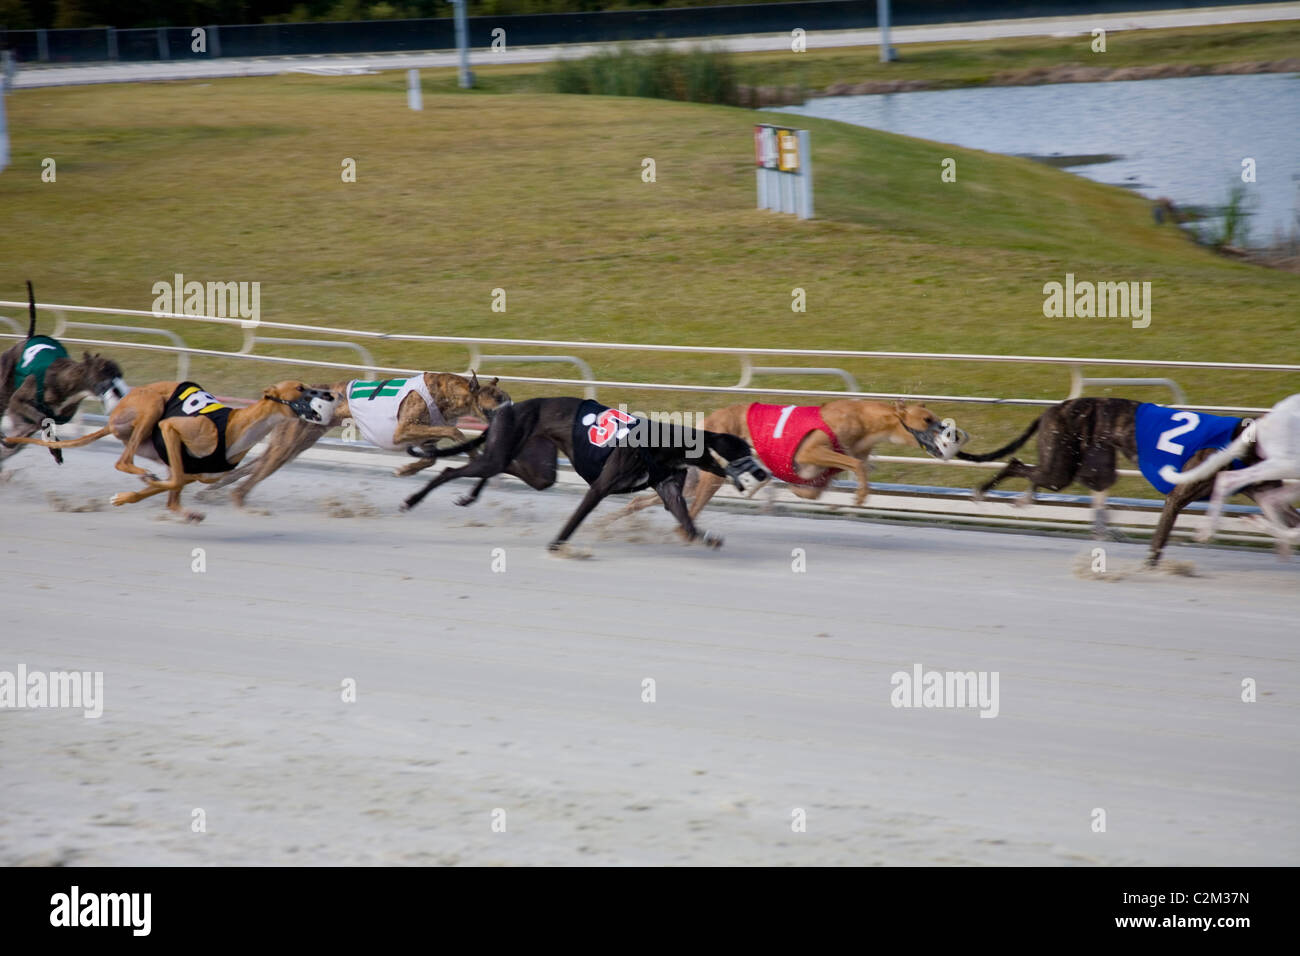 Daytona Beach Kennel Club offers greyhound racing action and a Poker Room,  all in a luxurious setting in Daytona Beach, FL Stock Photo - Alamy